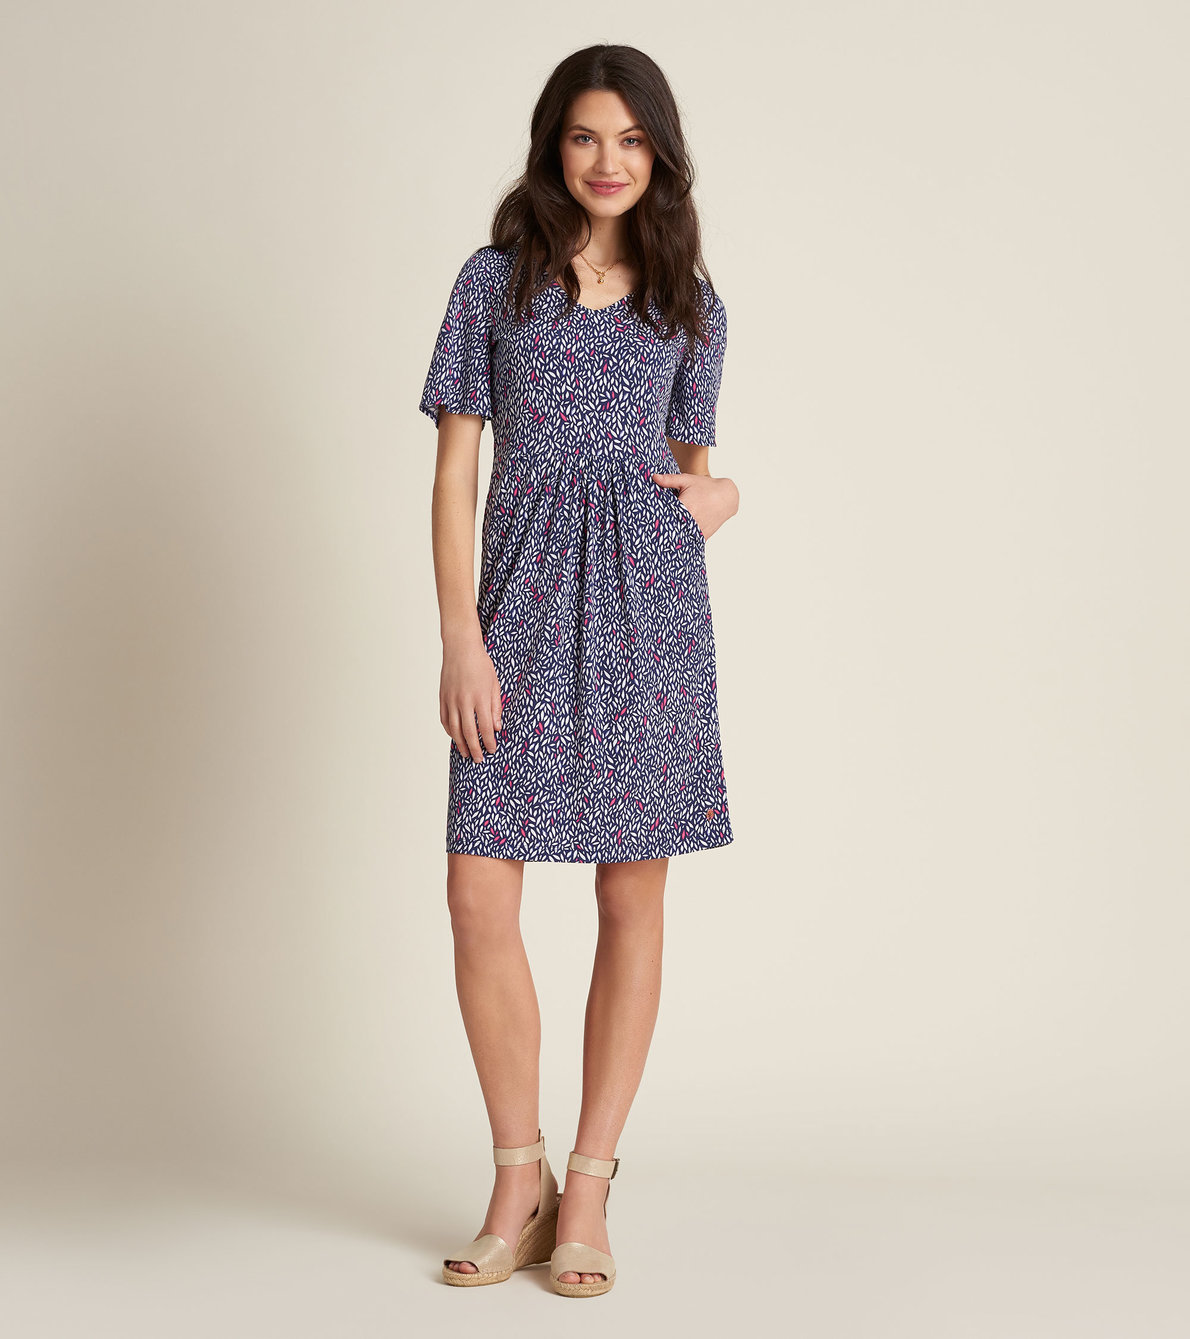 View larger image of Maggie Dress - Diamond Polka Dots